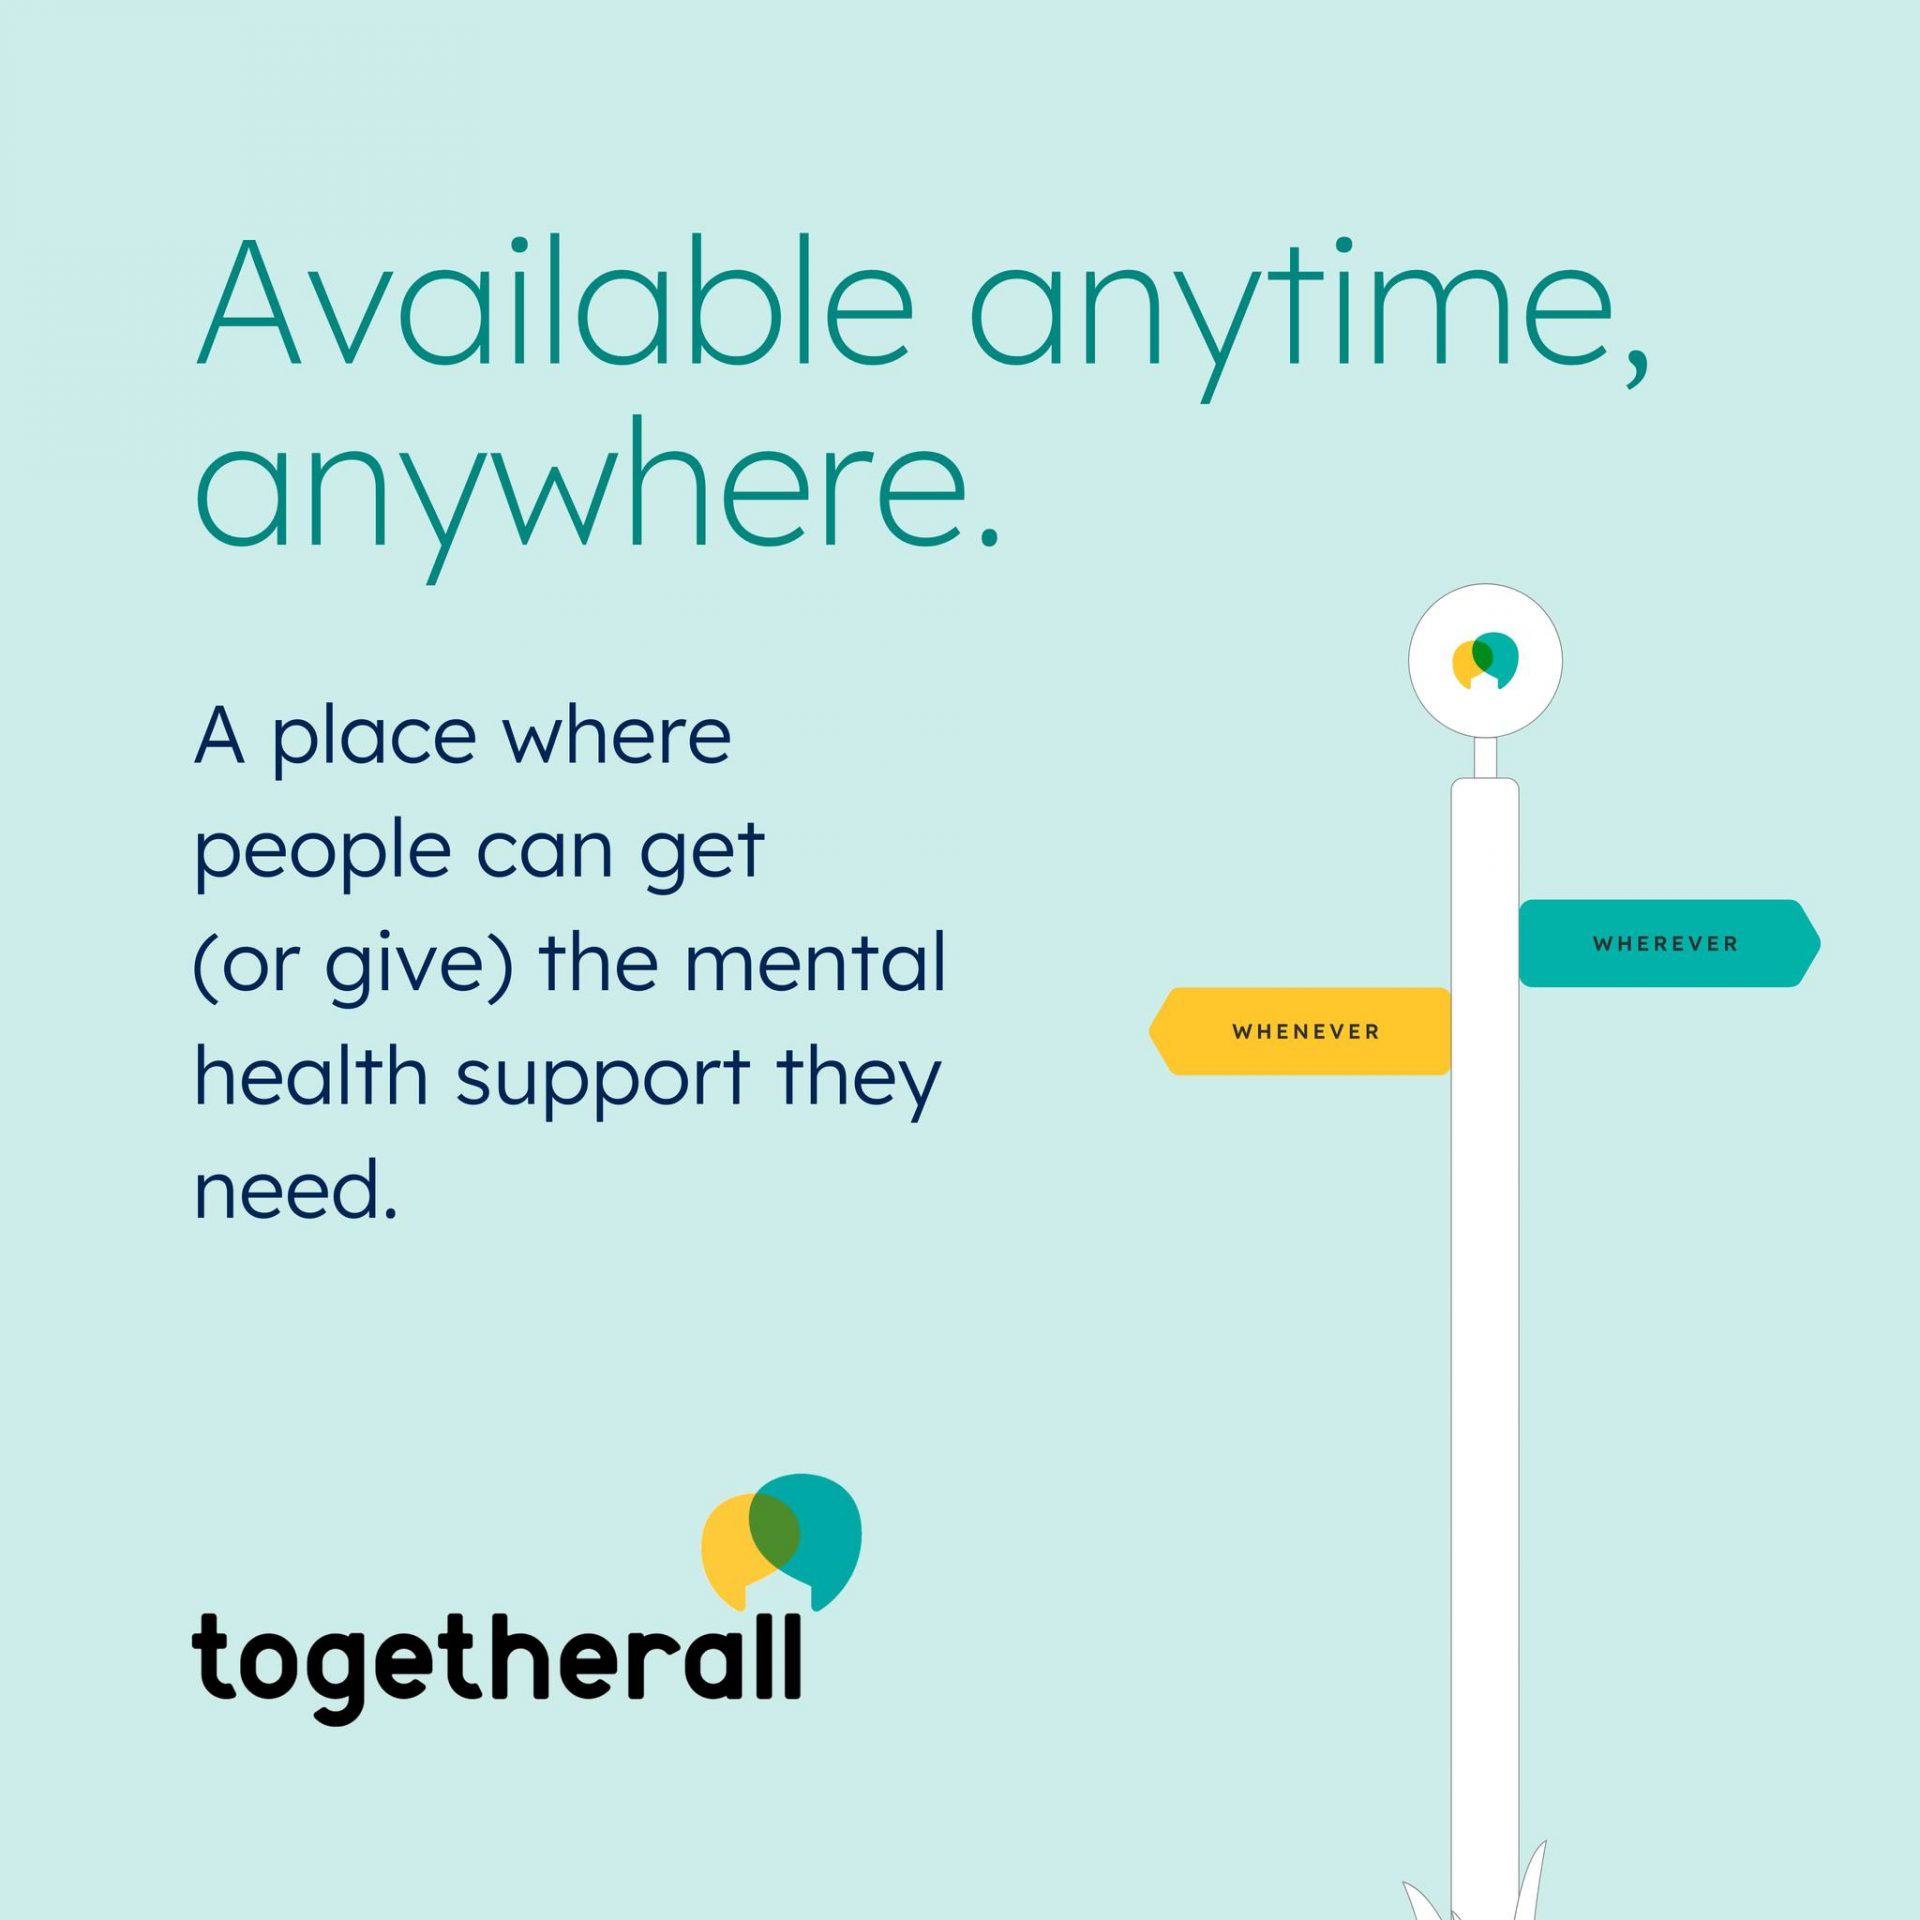 togetherall - Available anytime anywhere